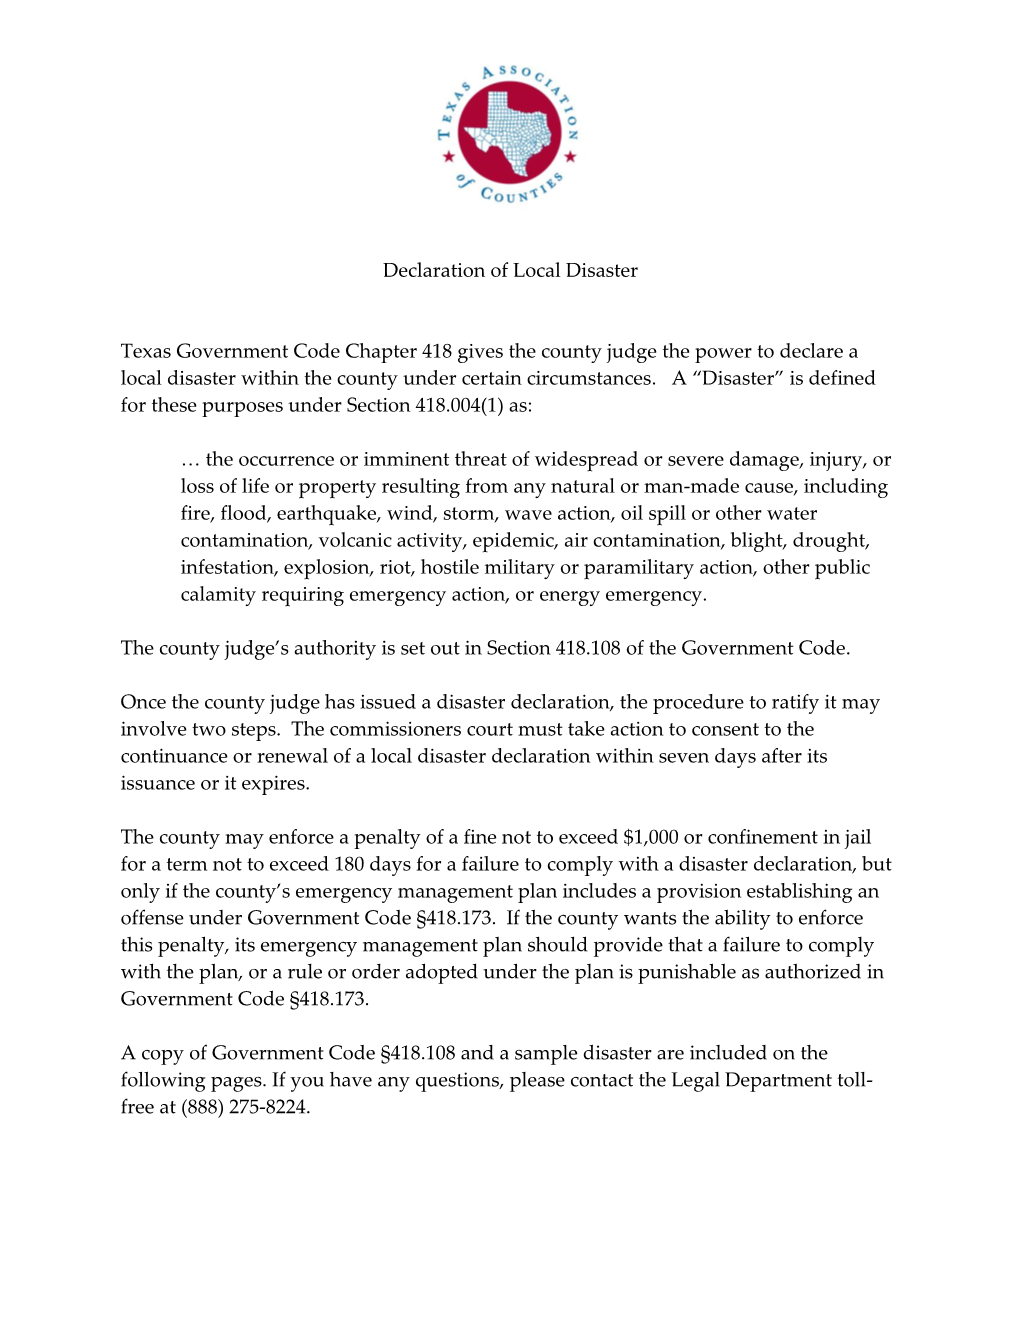 Declaration of Local Disaster Texas Government Code Chapter 418